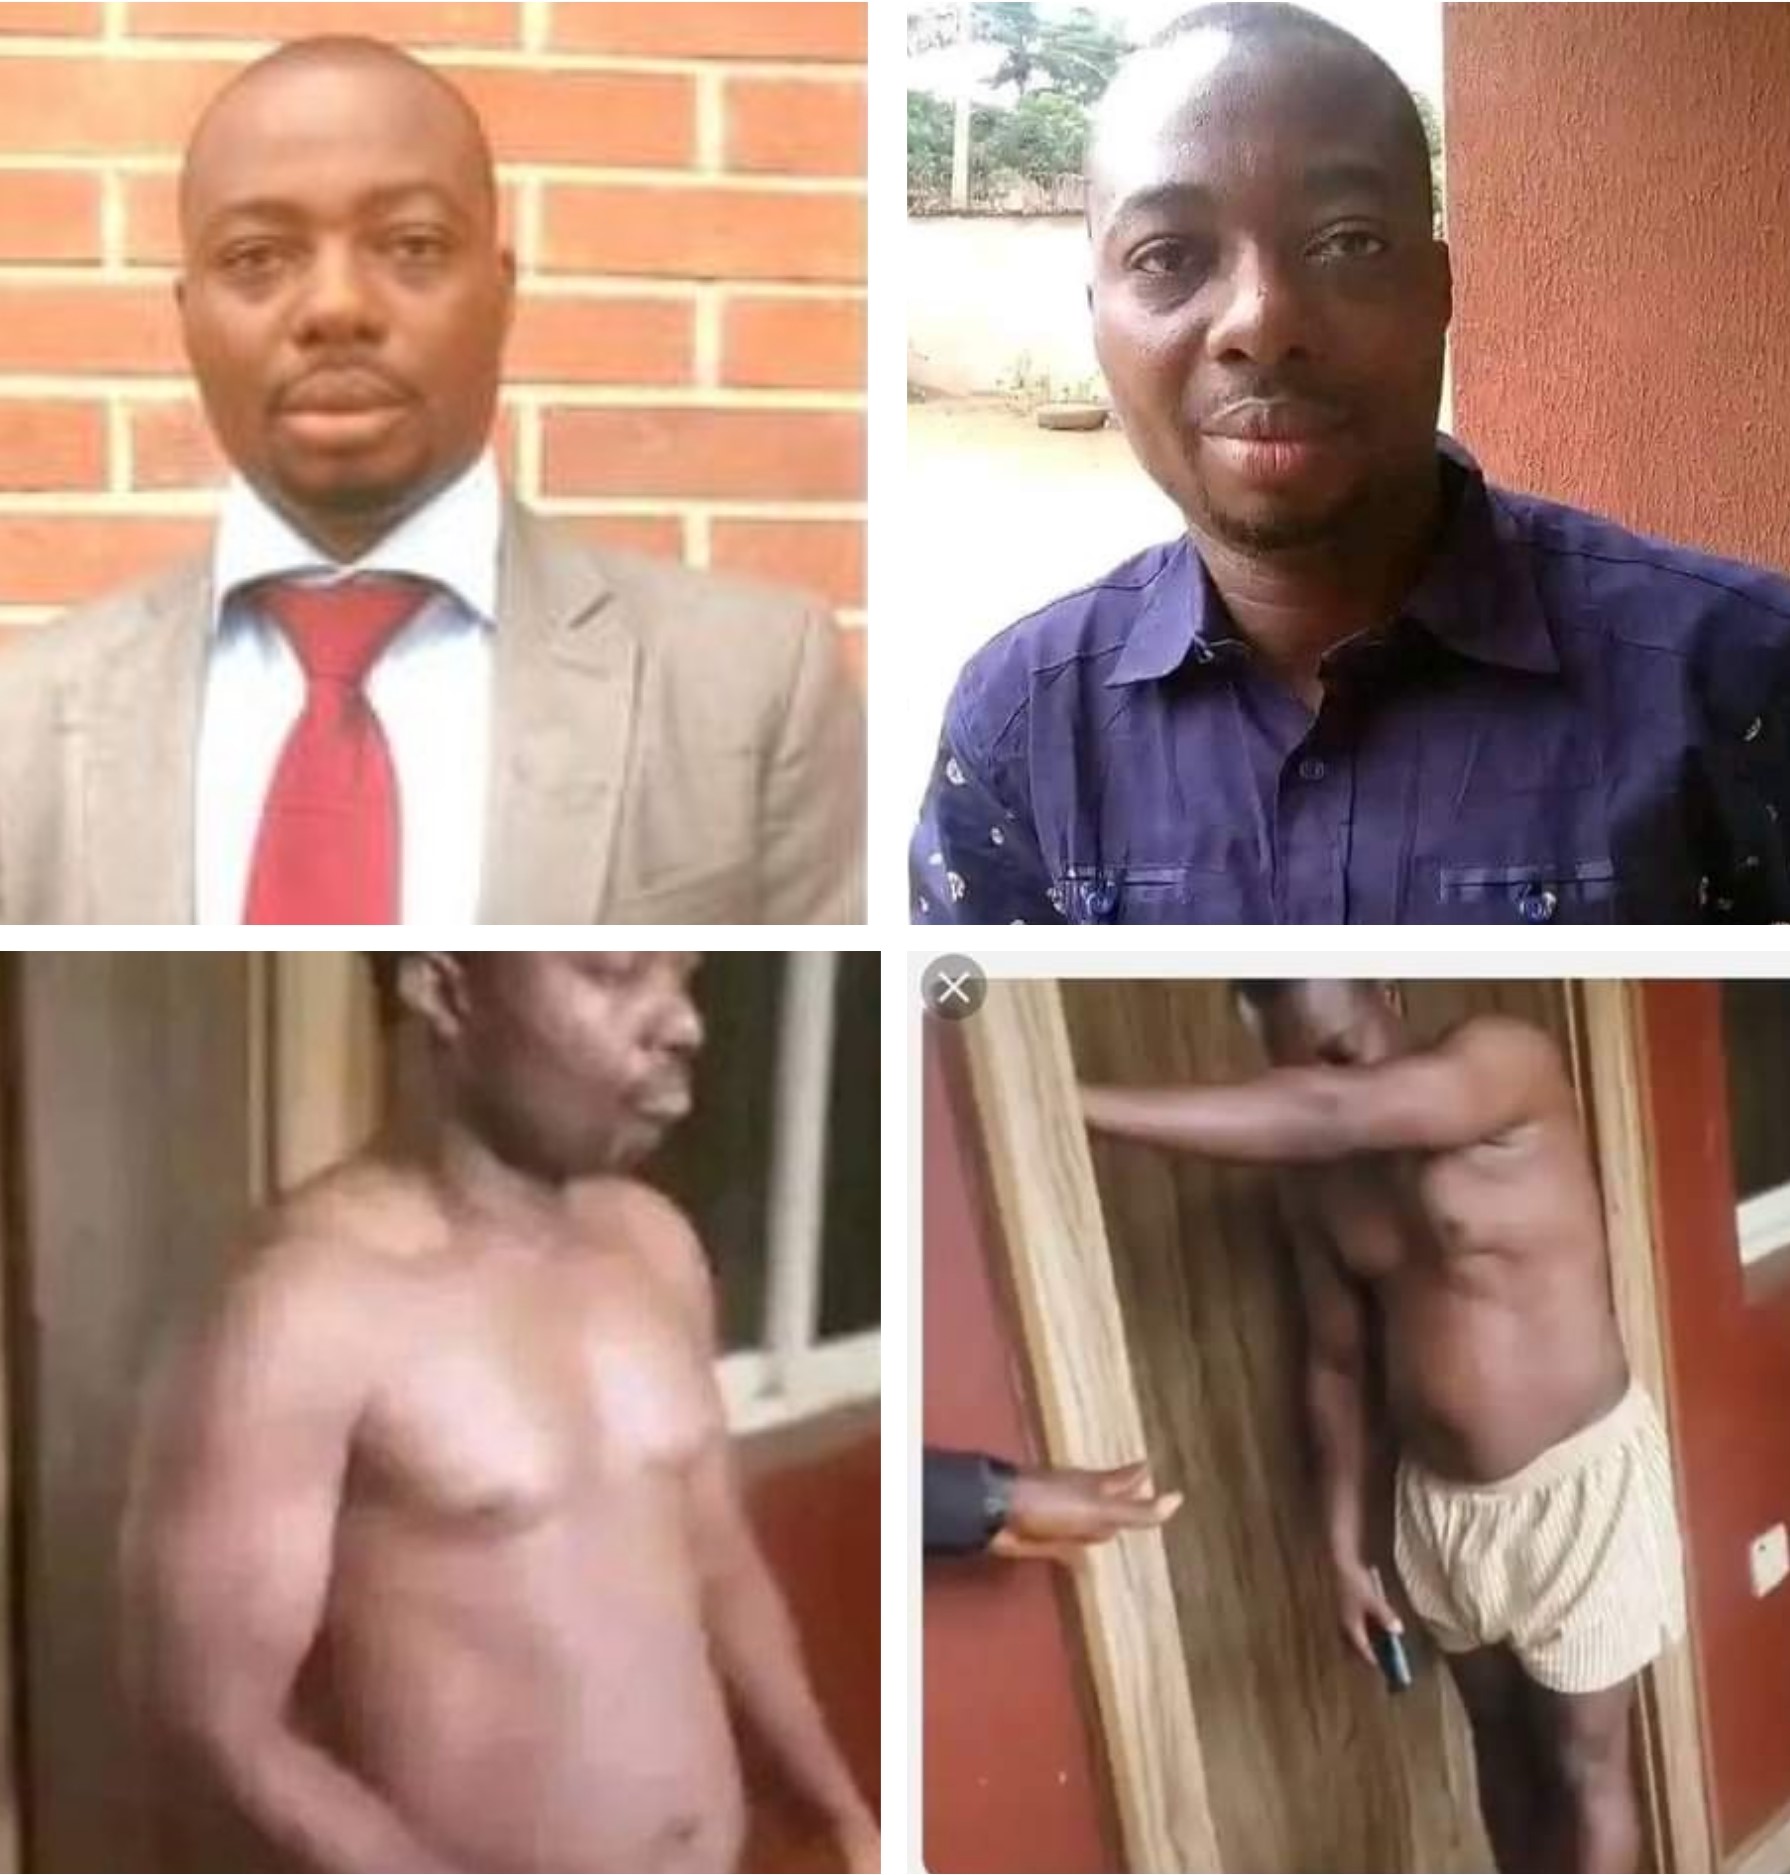 Sex-for-grade: UNN suspends lecturer in viral video